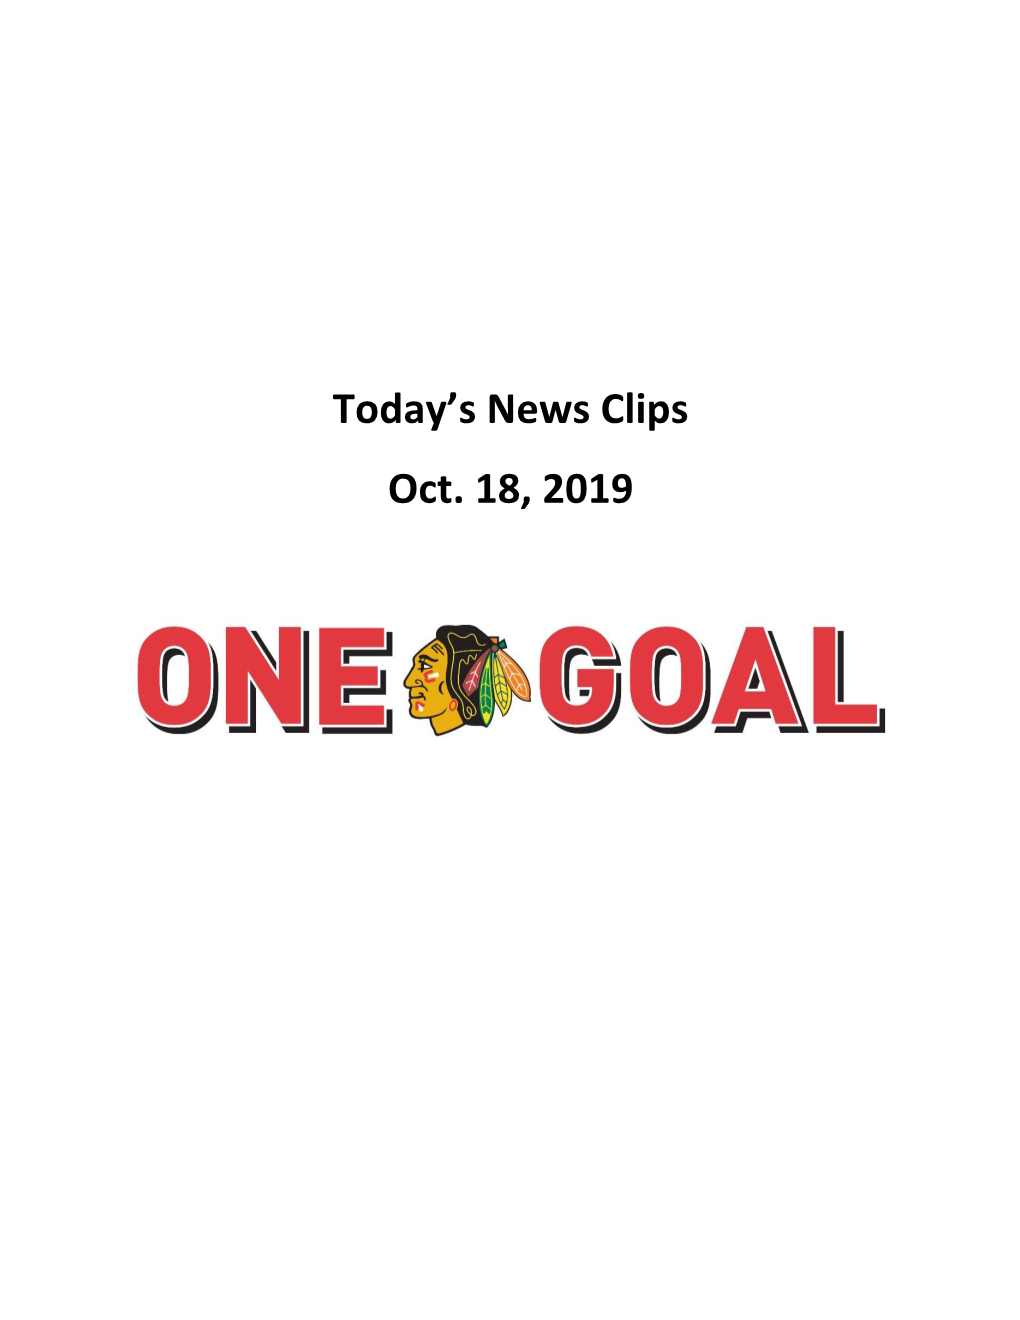 Today's News Clips Oct. 18, 2019